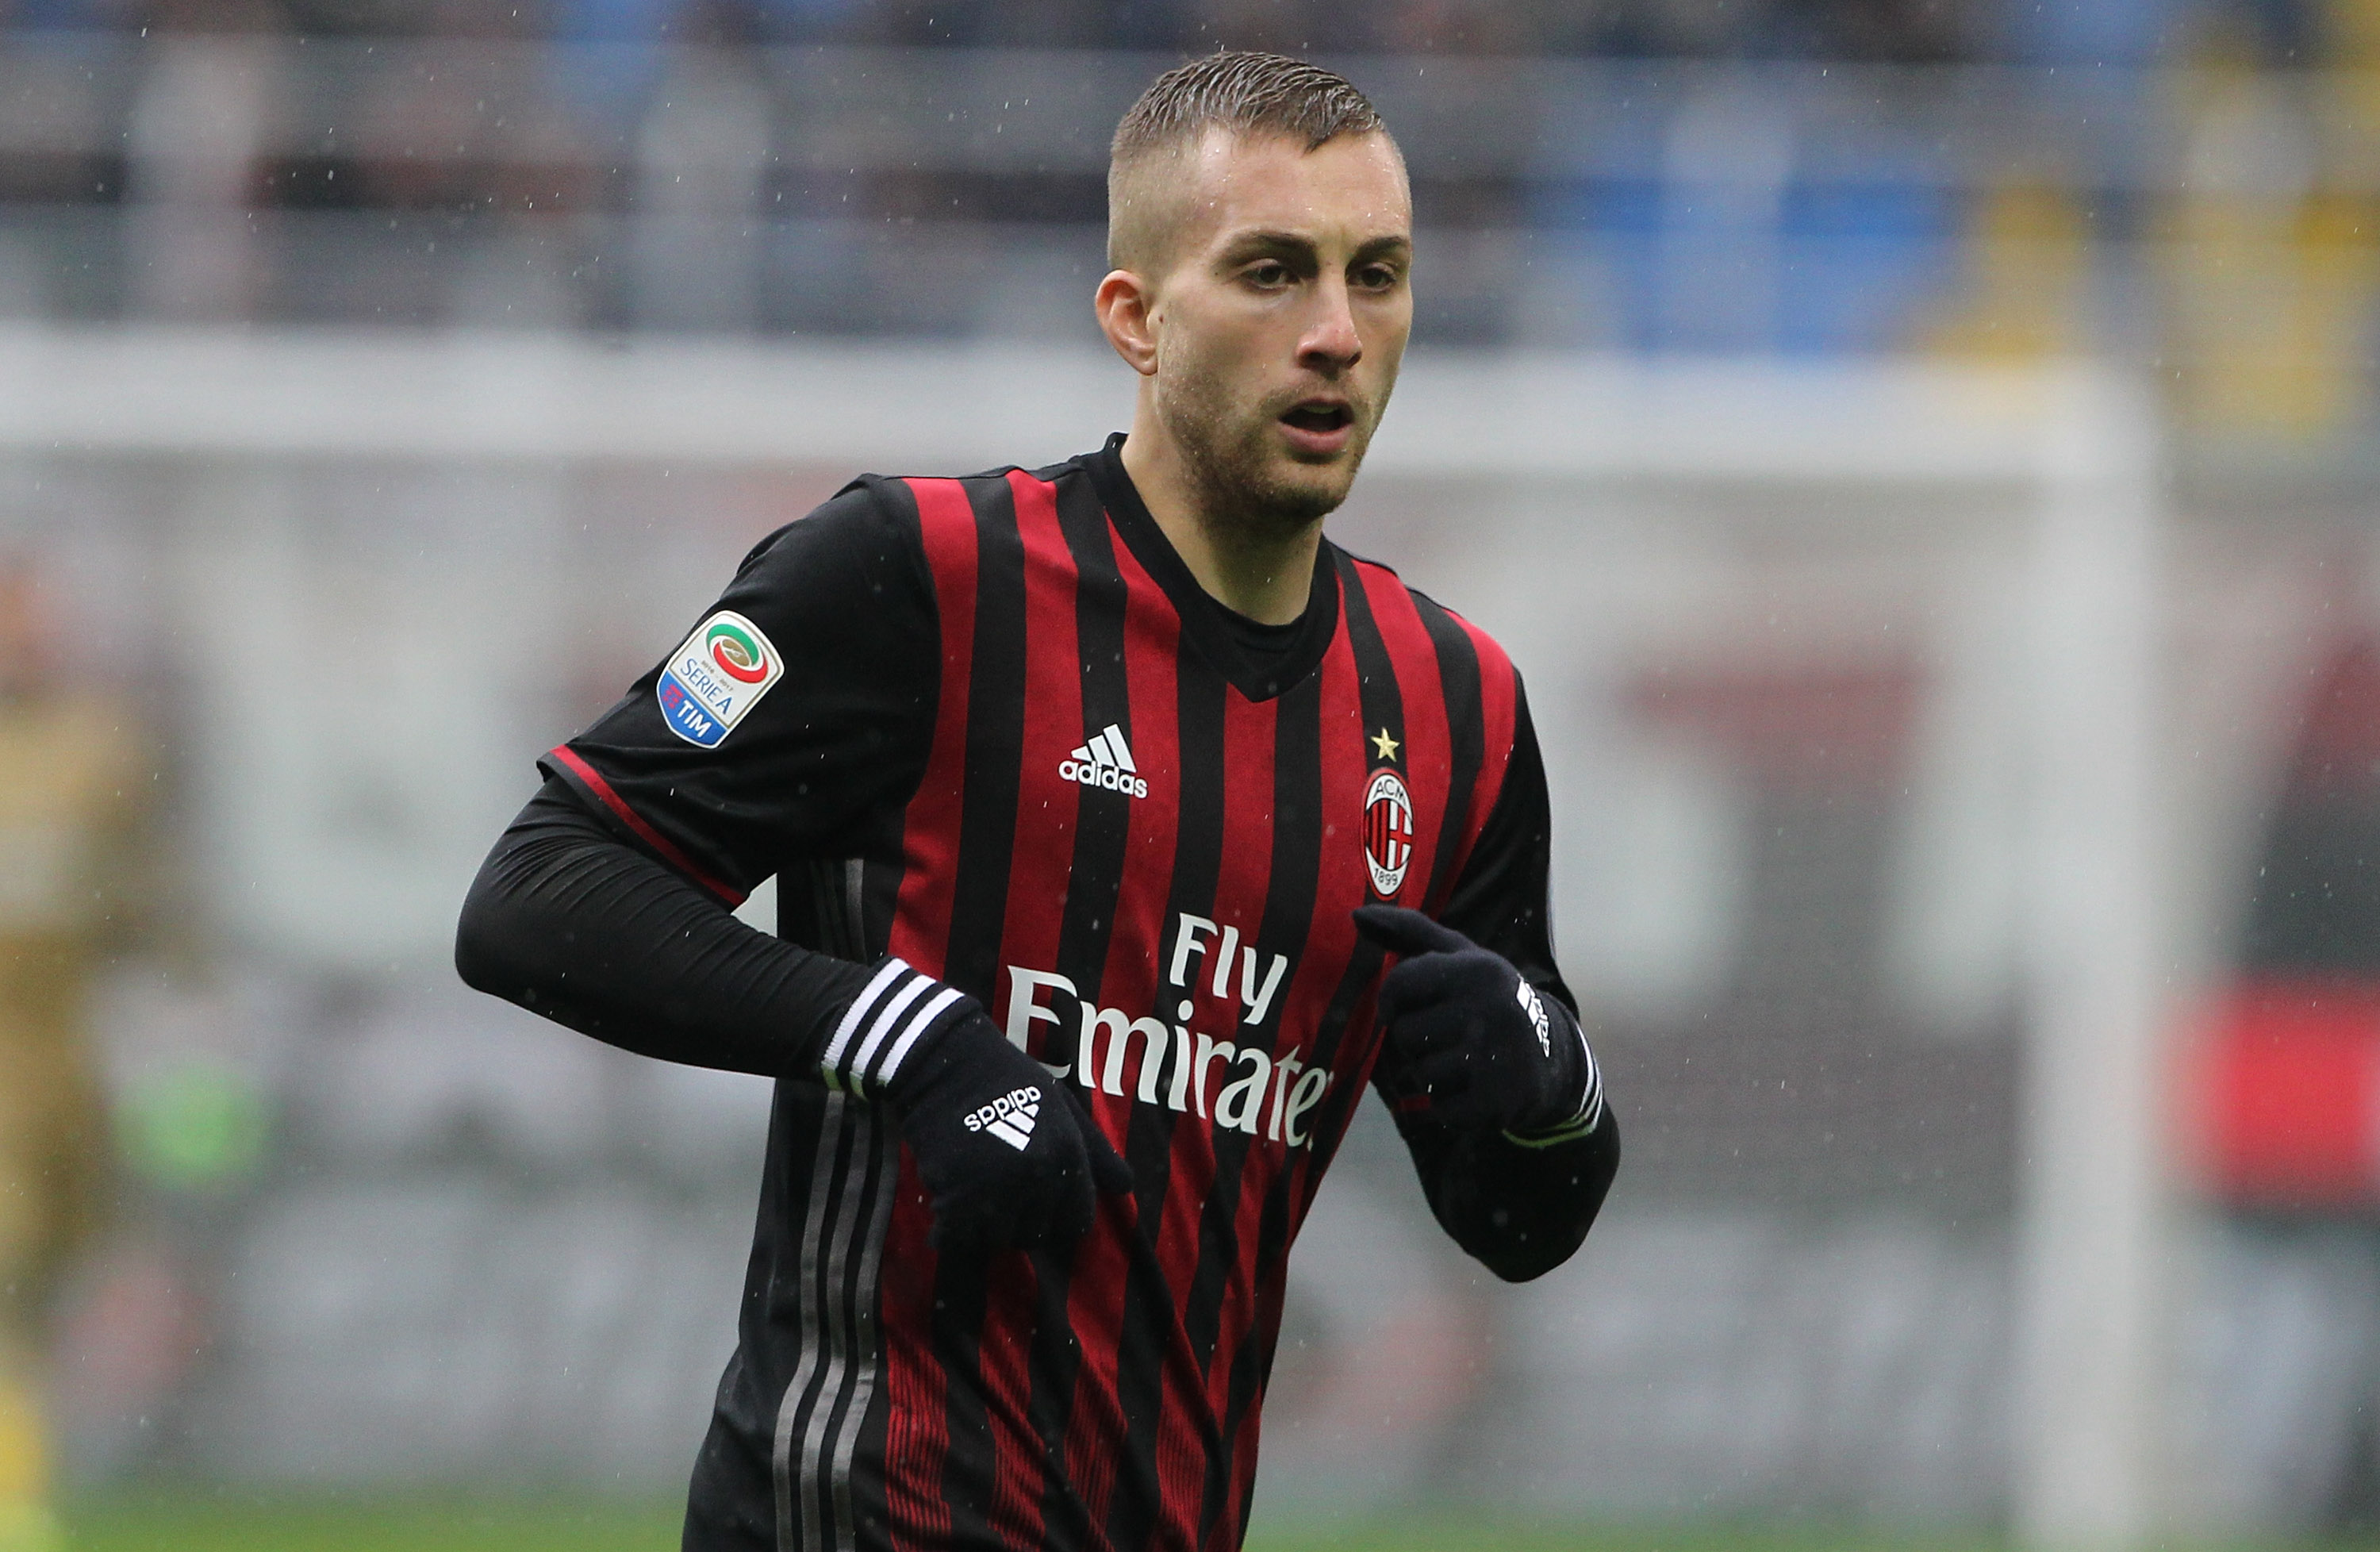 MILAN, ITALY - FEBRUARY 05:  Gerard Deulofeu of AC Milan looks on during the Serie A match between AC Milan and UC Sampdoria at Stadio Giuseppe Meazza on February 5, 2017 in Milan, Italy.  (Photo by Marco Luzzani/Getty Images)